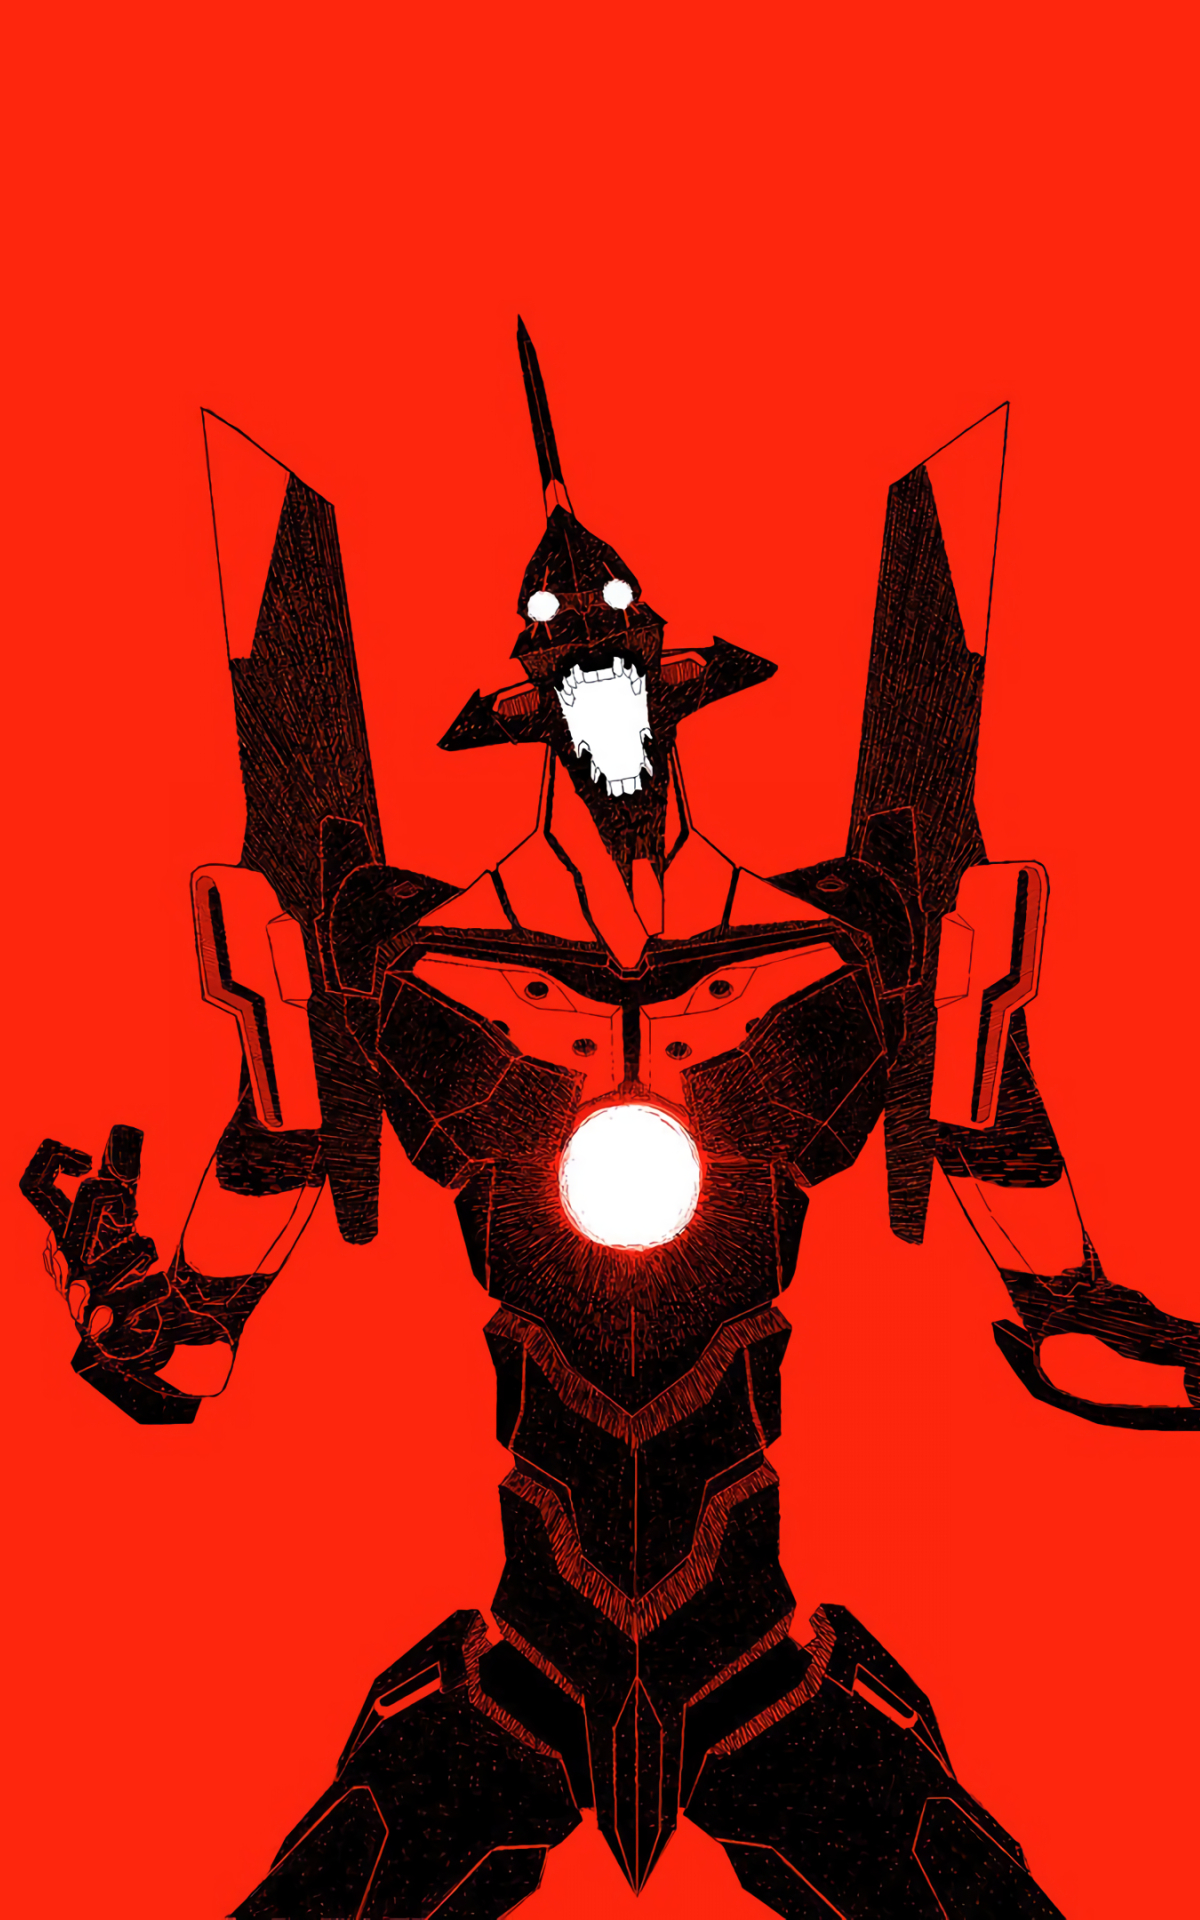 10x19 Evangelion Unit 01 10x19 Resolution Wallpaper Hd Anime 4k Wallpapers Images Photos And Background Wallpapers Den